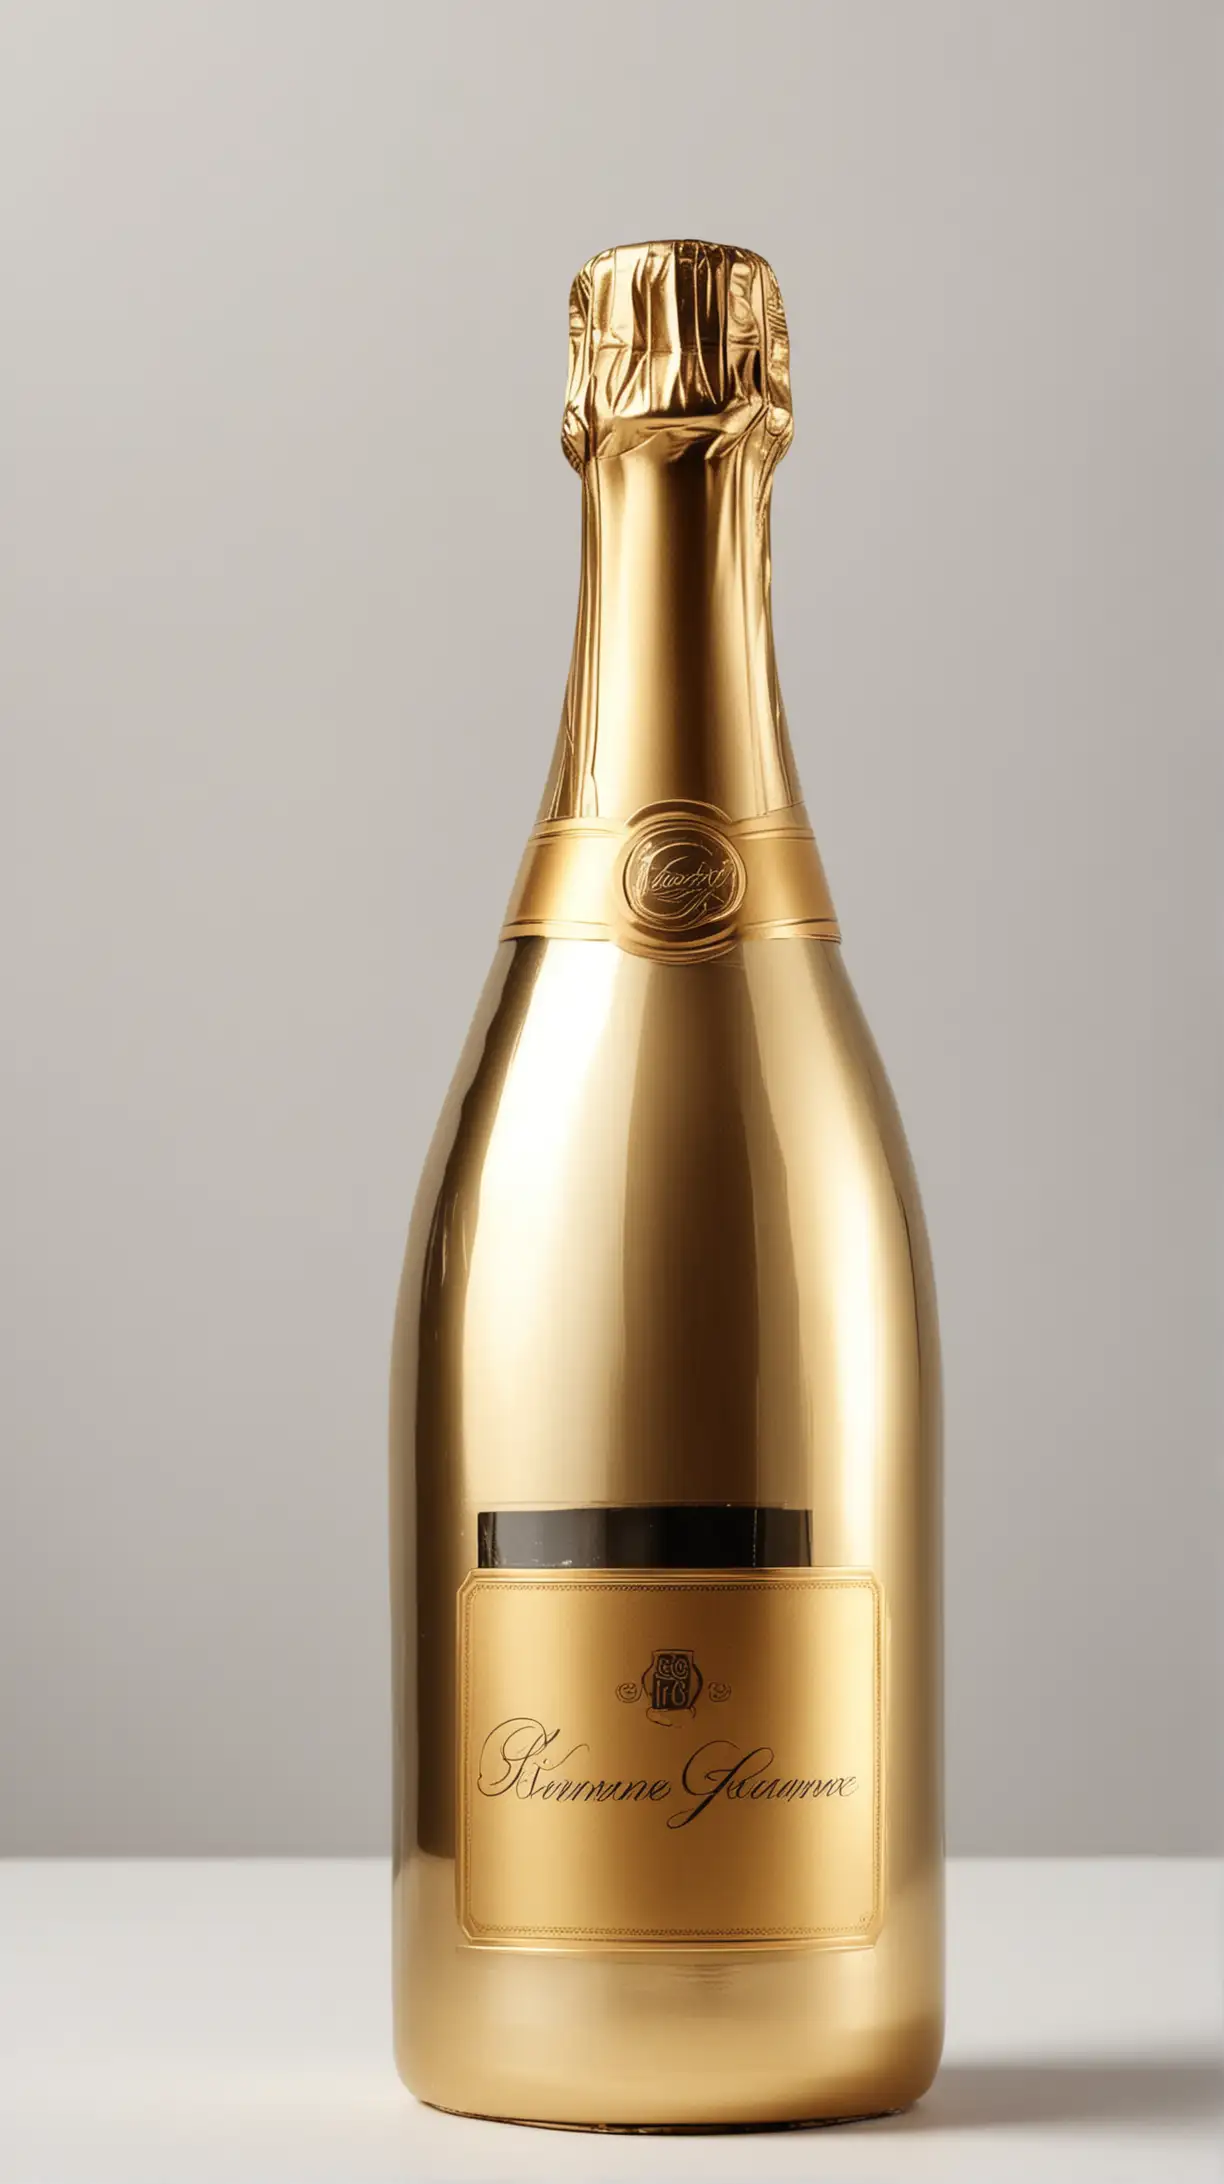 photo like gold bottle of champagne with a gold label, no words on the label, isolated on a solid white background